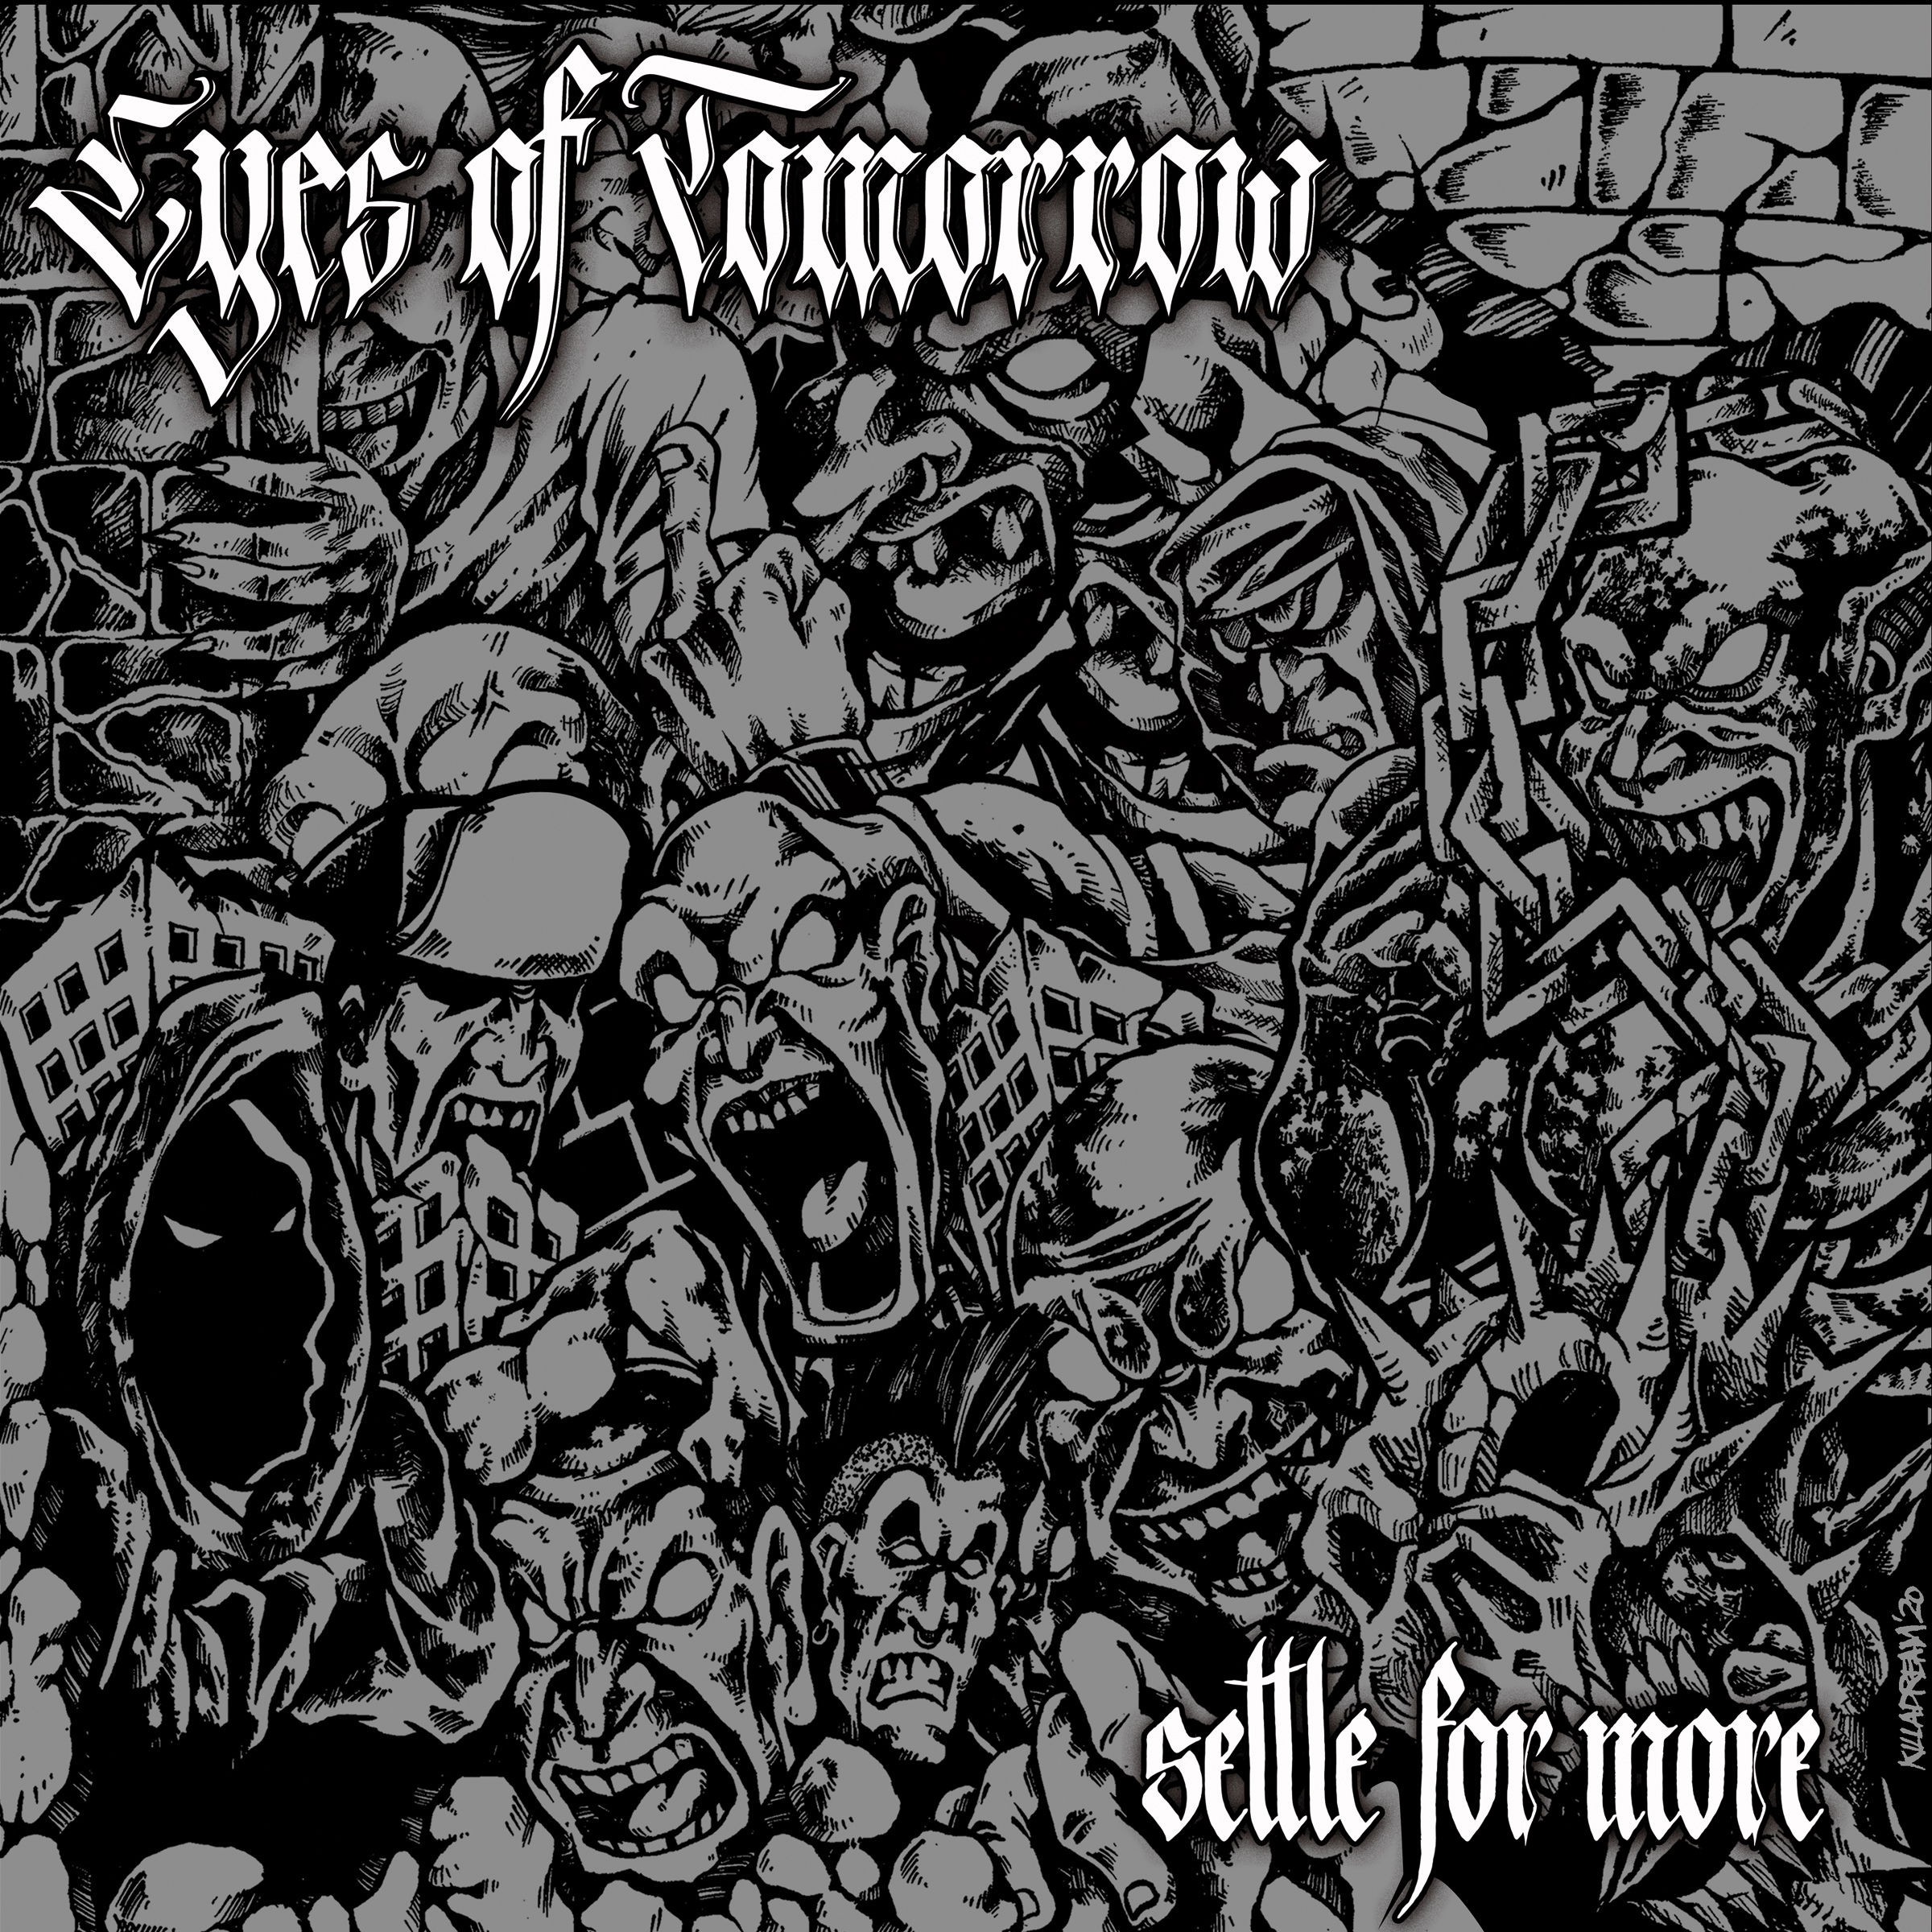 eyes-of-tomorrow-settle-for-more-ein-album-review